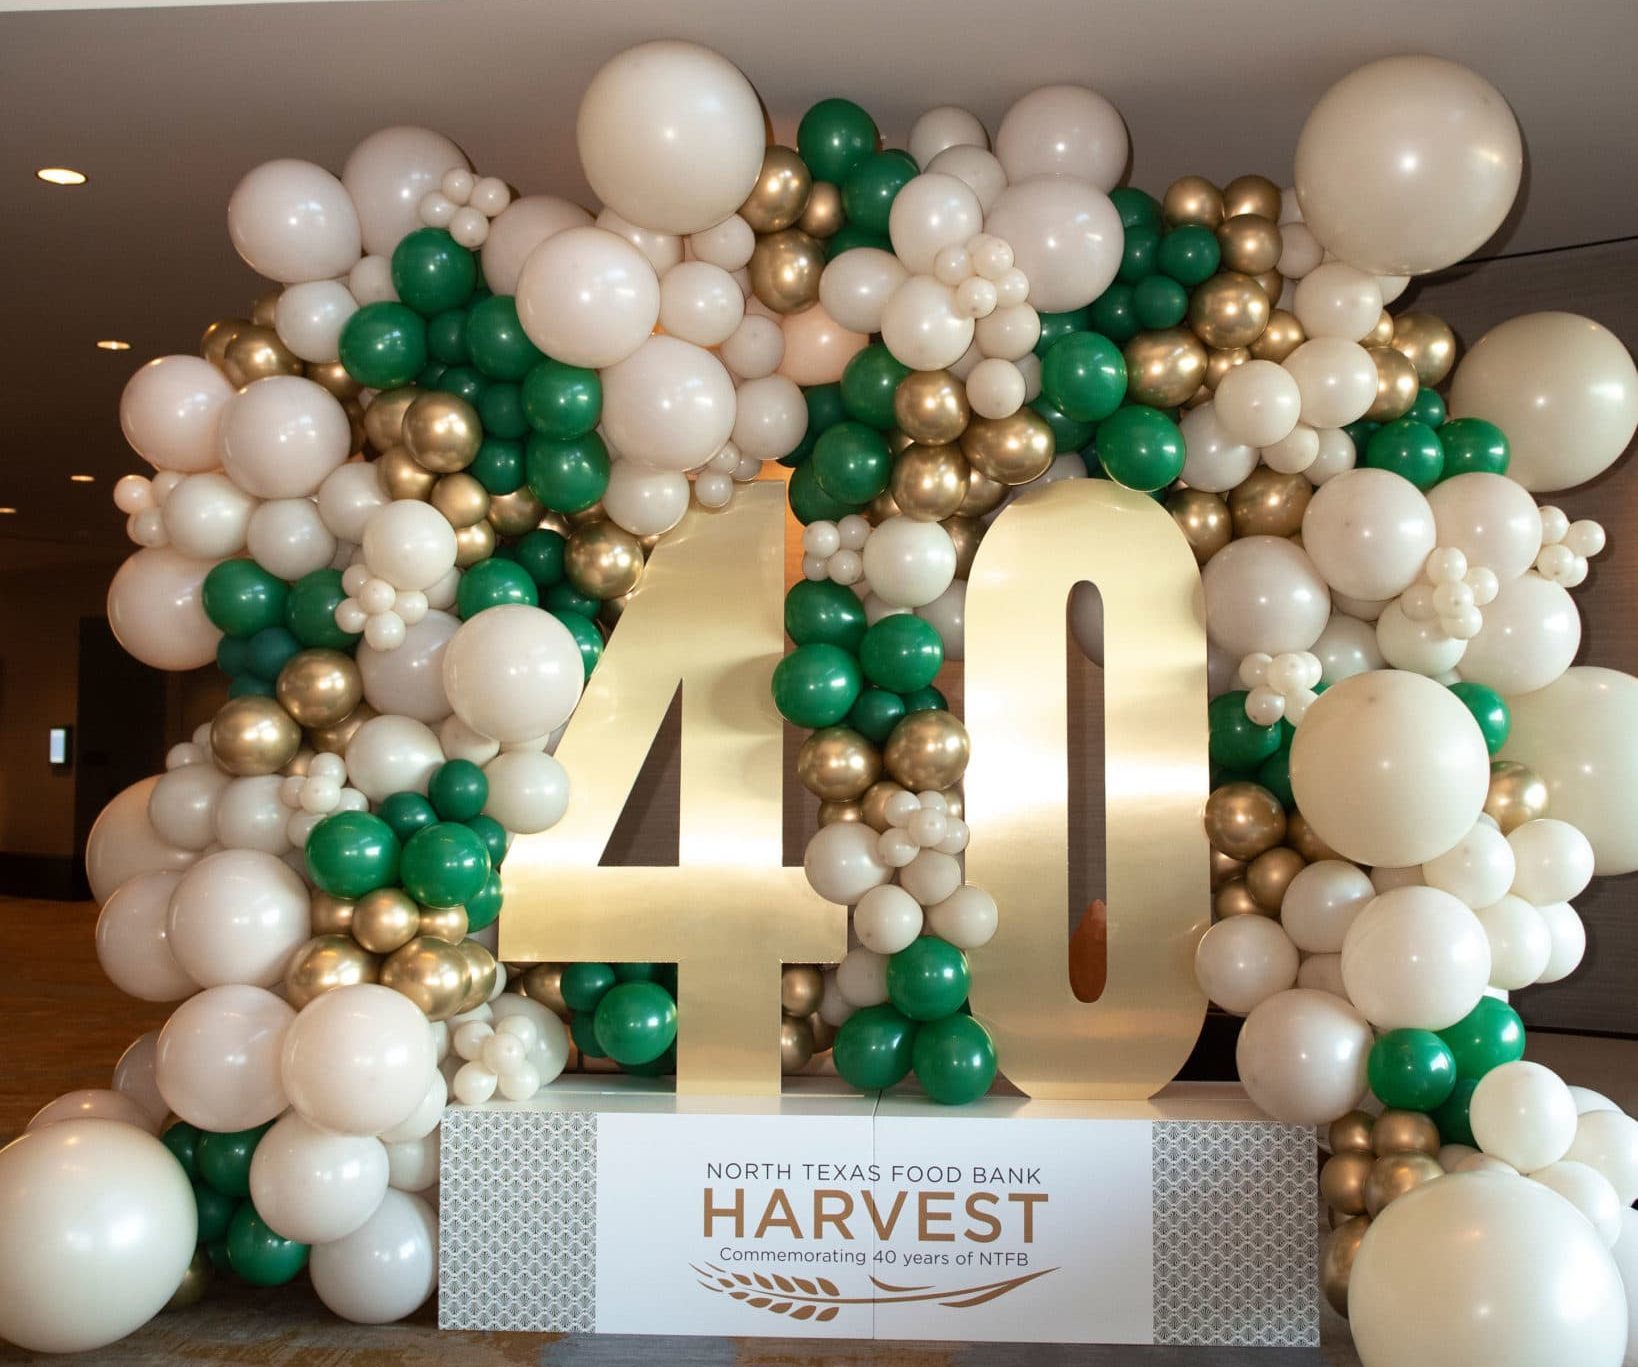 40th Anniversary balloon display at Harvest 2022 event